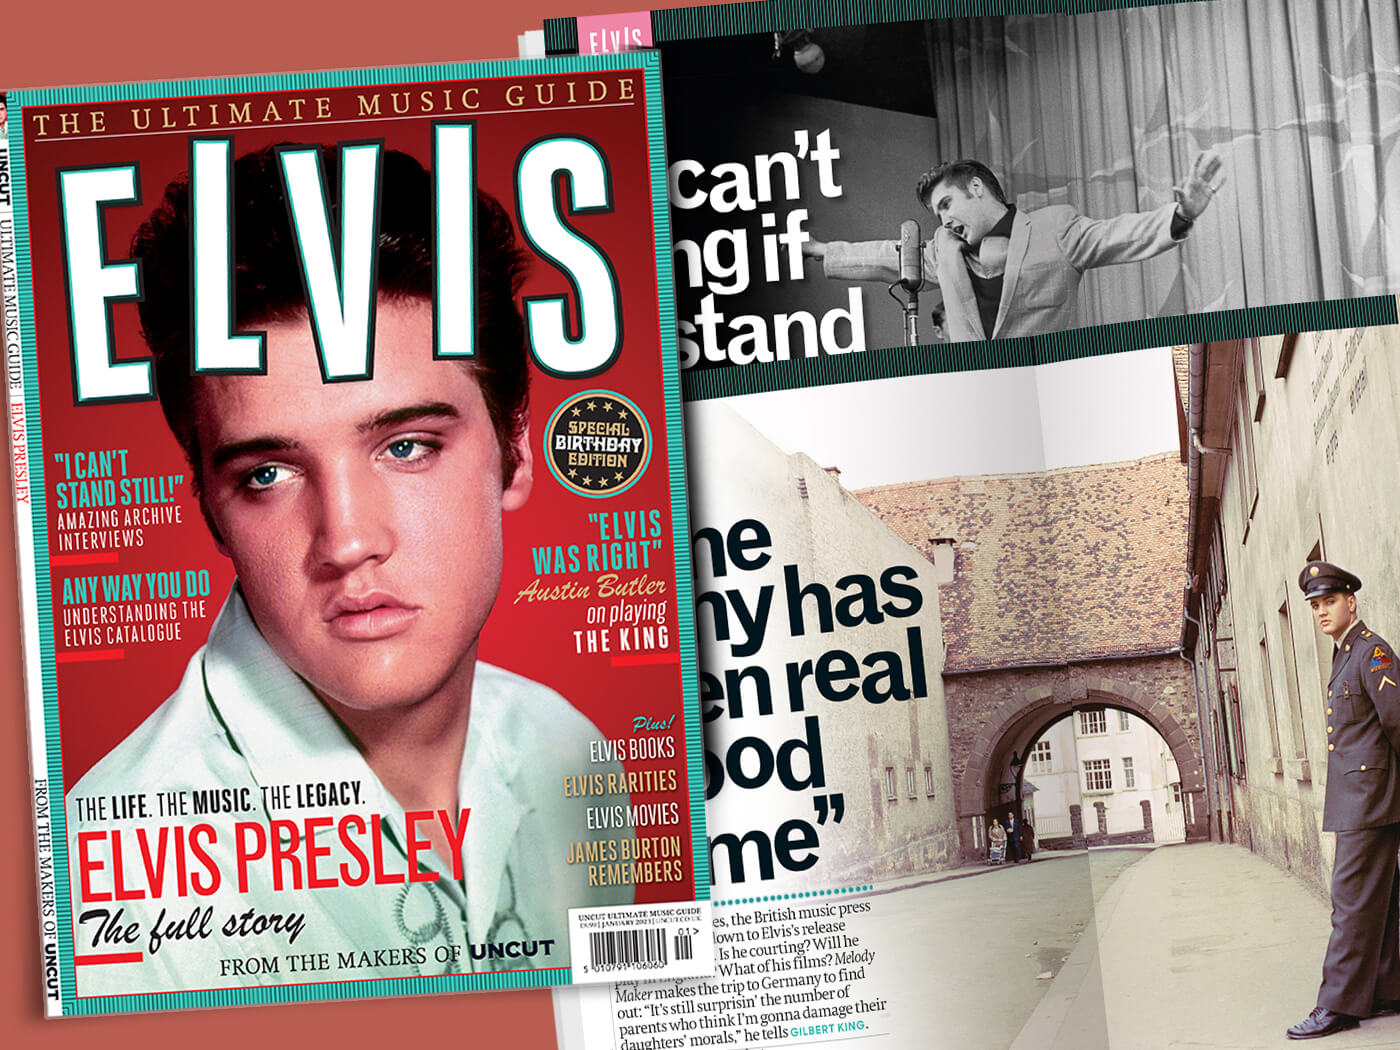 Introducing the Ultimate Music Guide to Elvis Presley